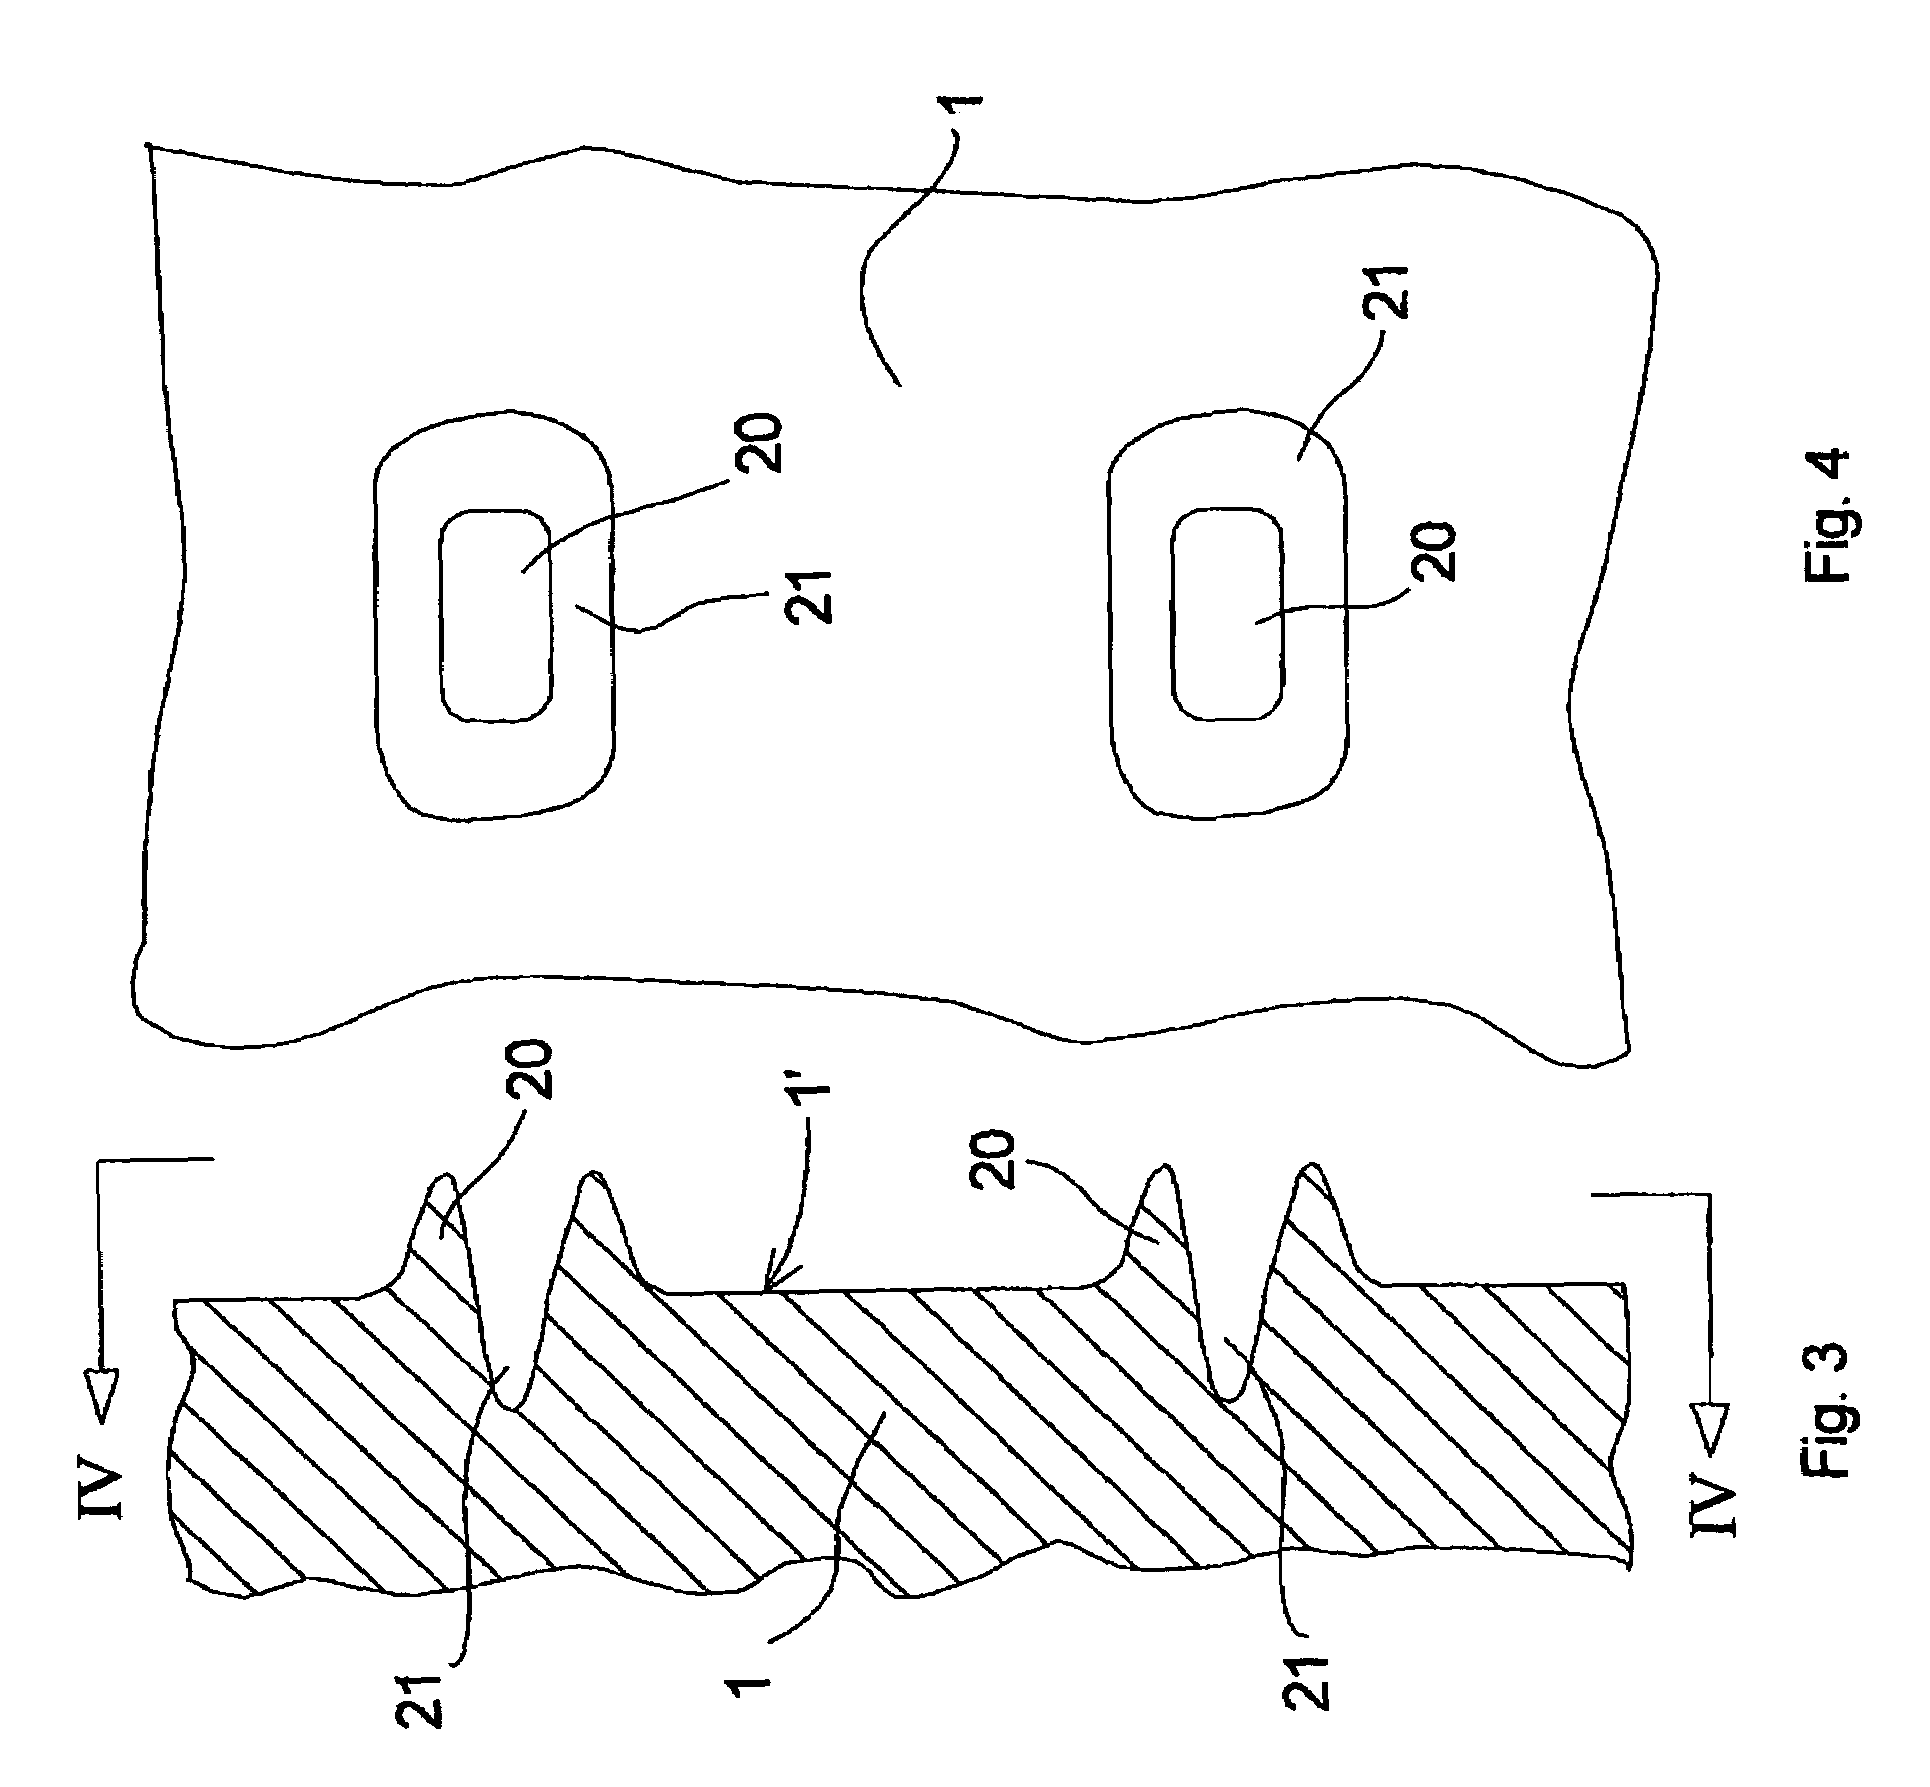 Method for frictionally connecting the front surfaces of two machine components for transmitting high torques or transverse forces